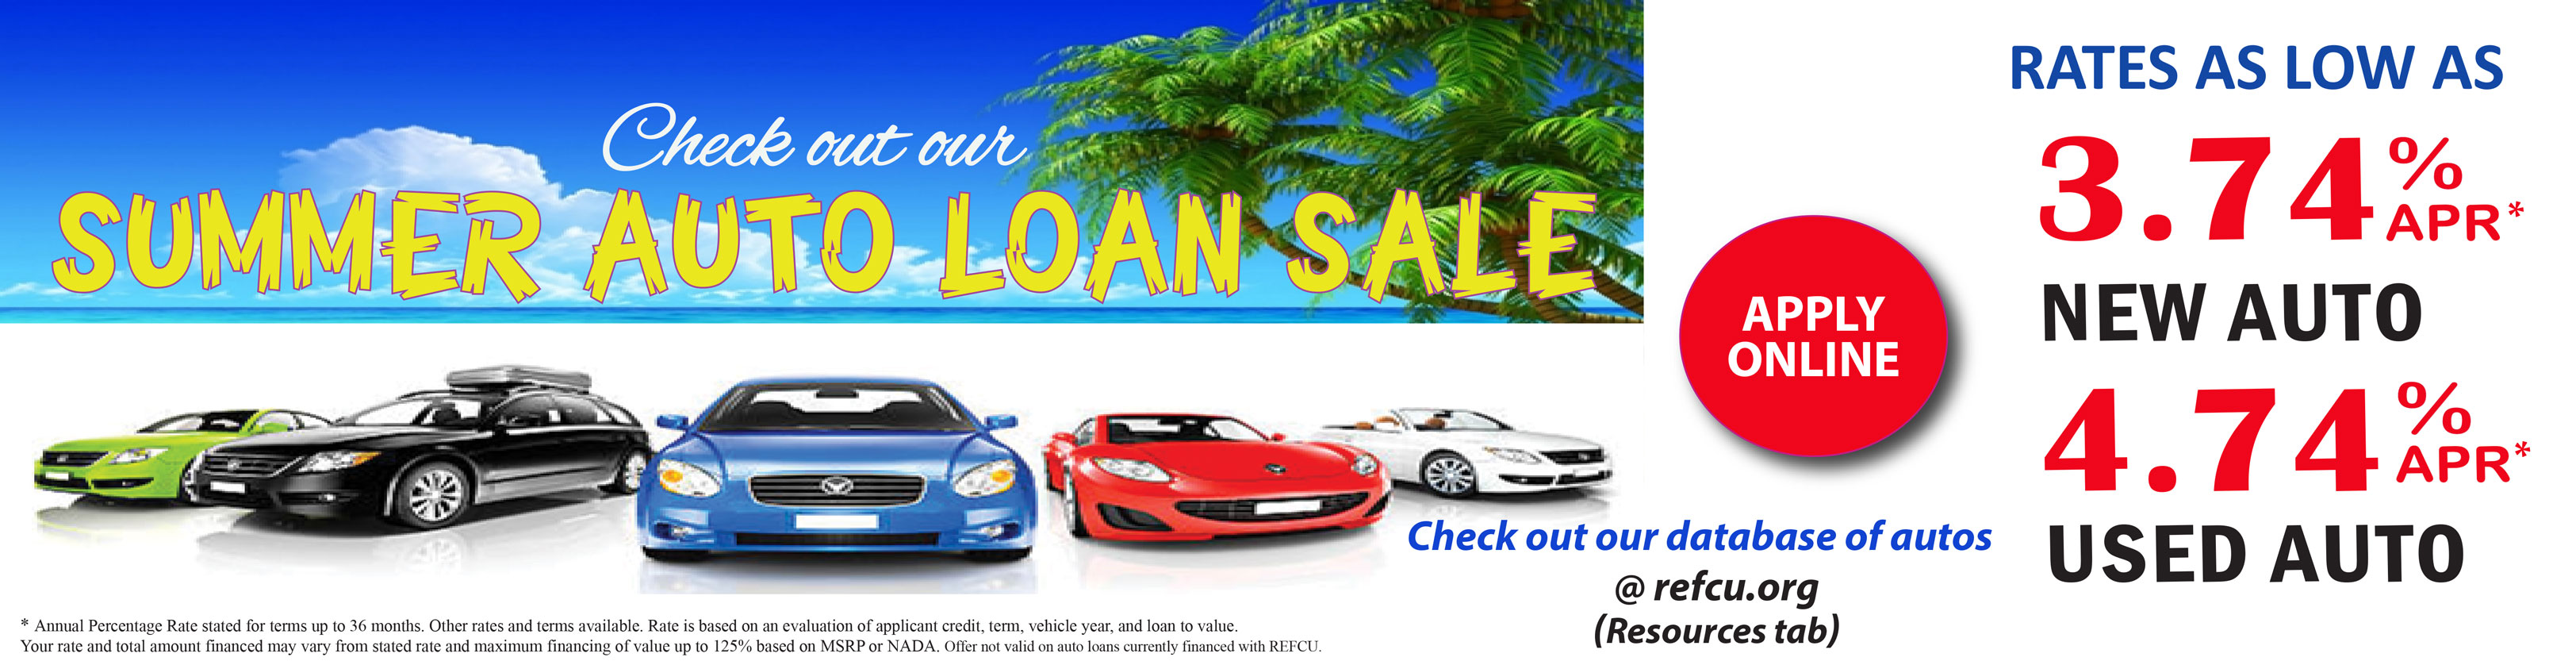 Check out our summer auto loan sale